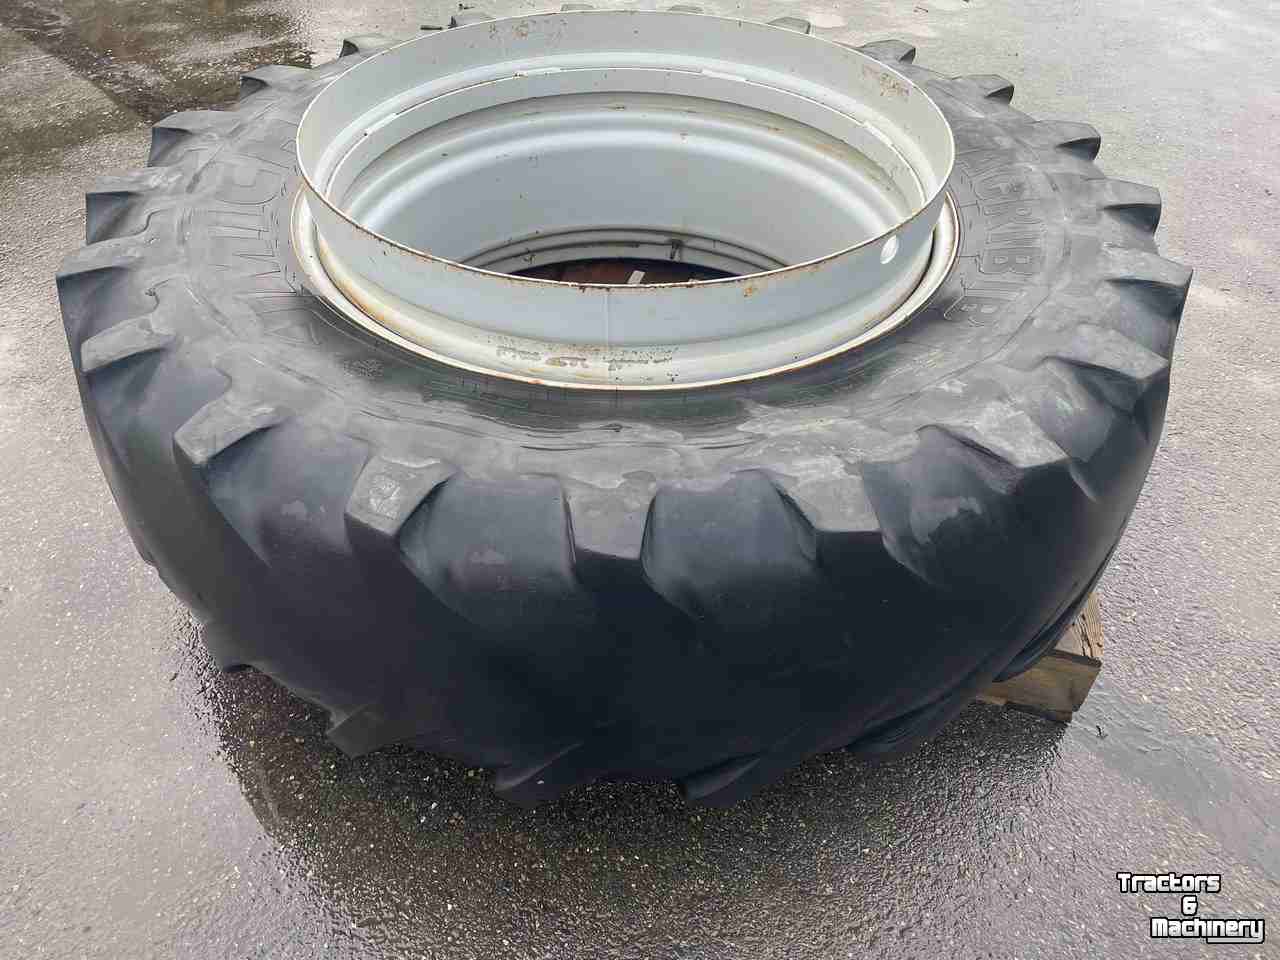 Wheels, Tyres, Rims & Dual spacers Michelin 18.4R38